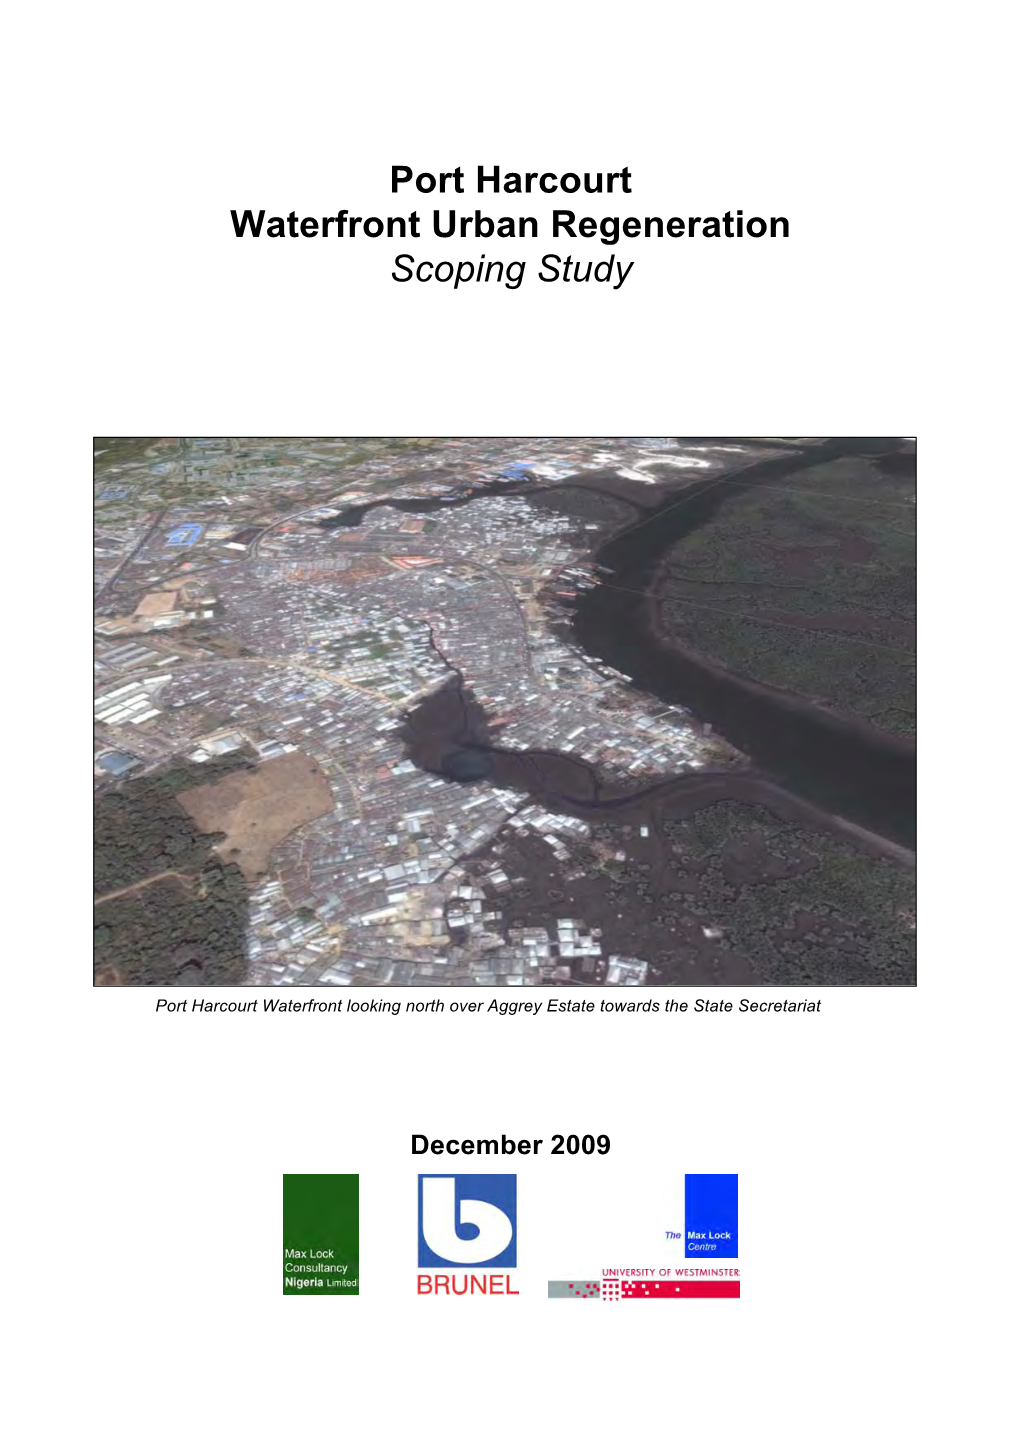 Report on Housing Options for Port Harcourt.Pdf [4.32